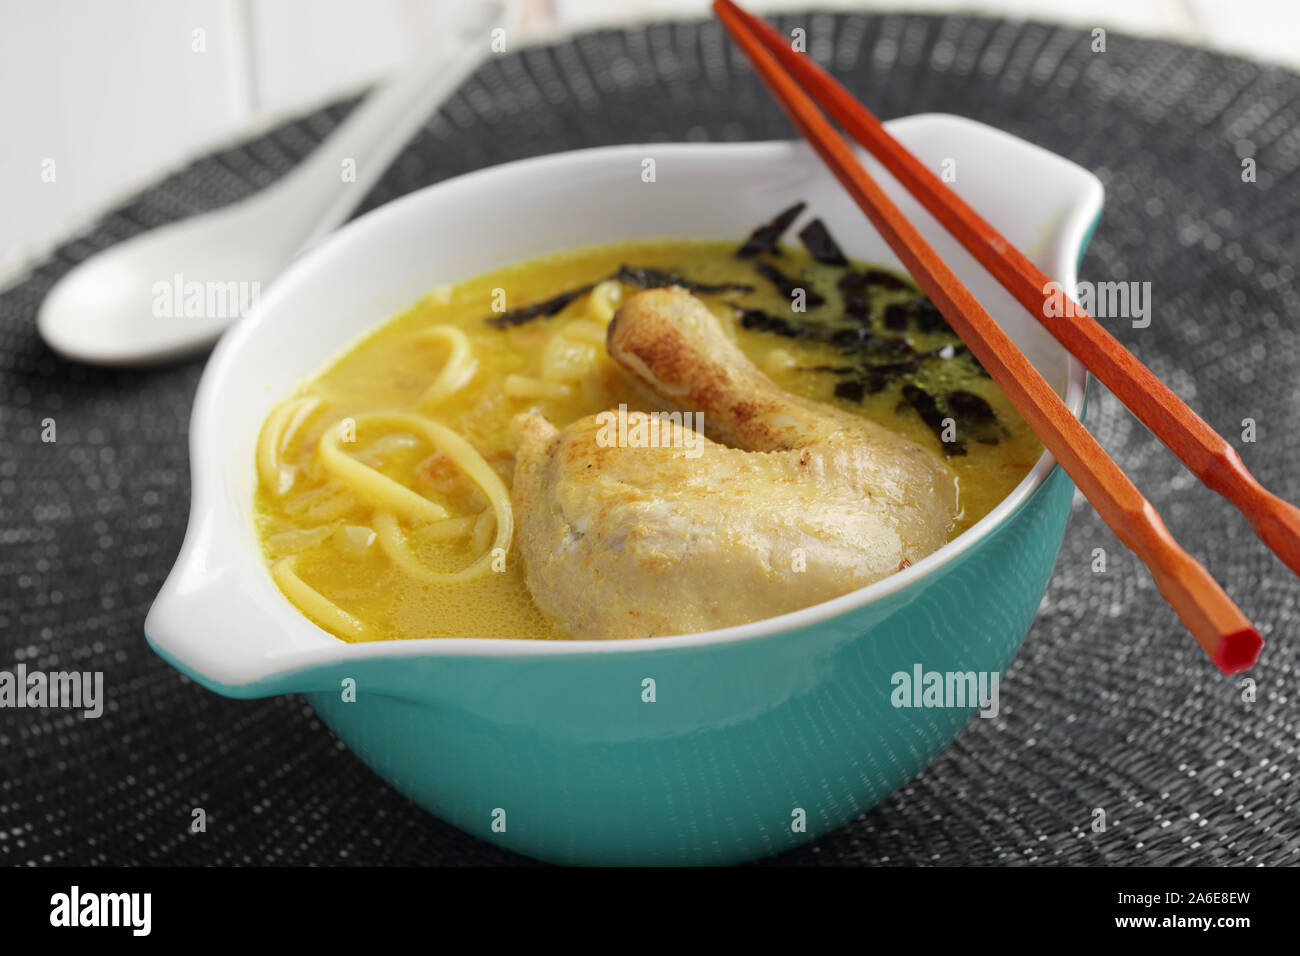 Bowl of chicken coconut milk soup with pasta, curry, and nori Stock Photo